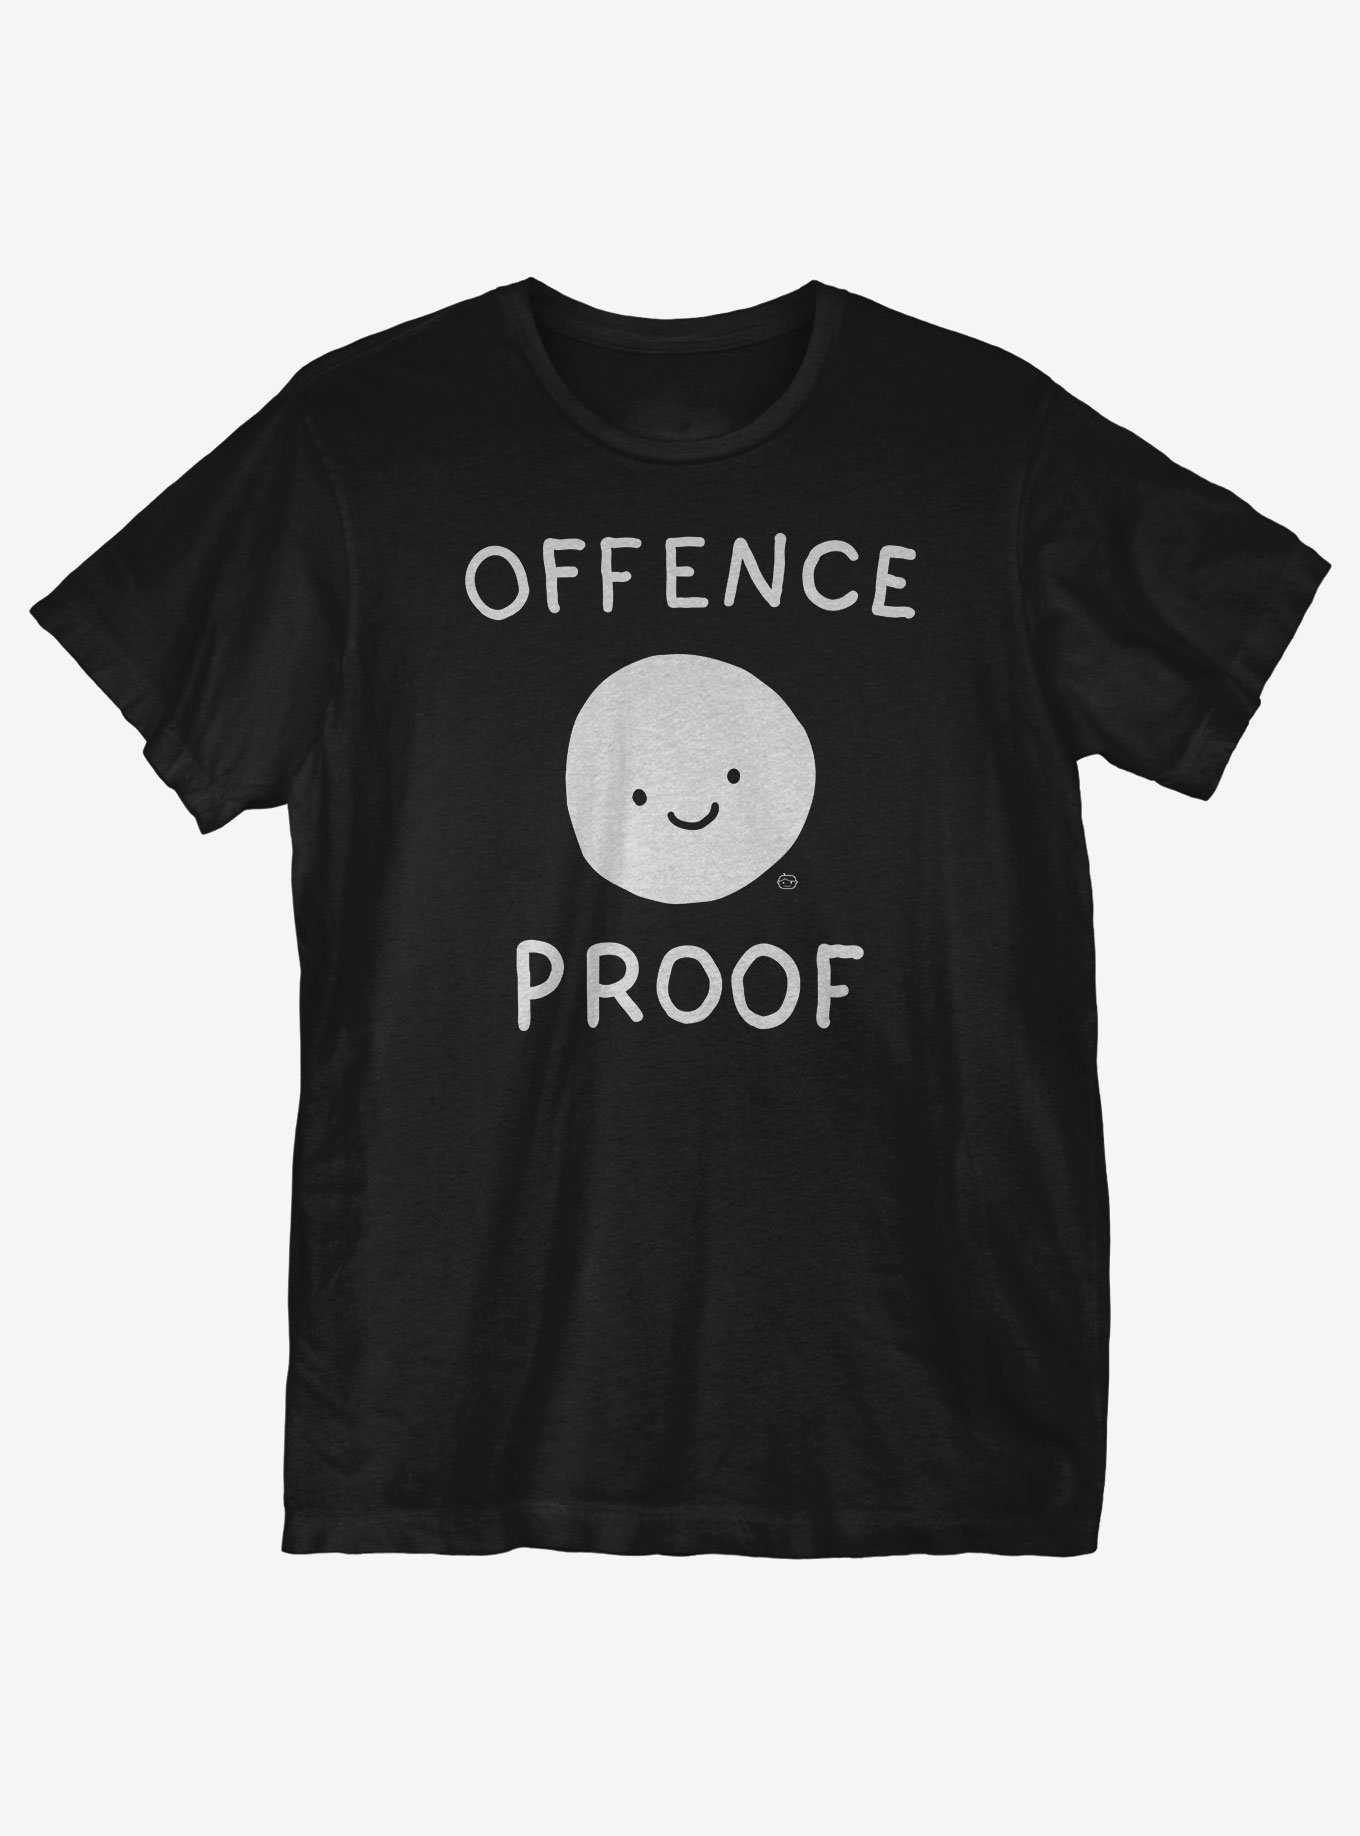 Offence Proof T-Shirt, , hi-res